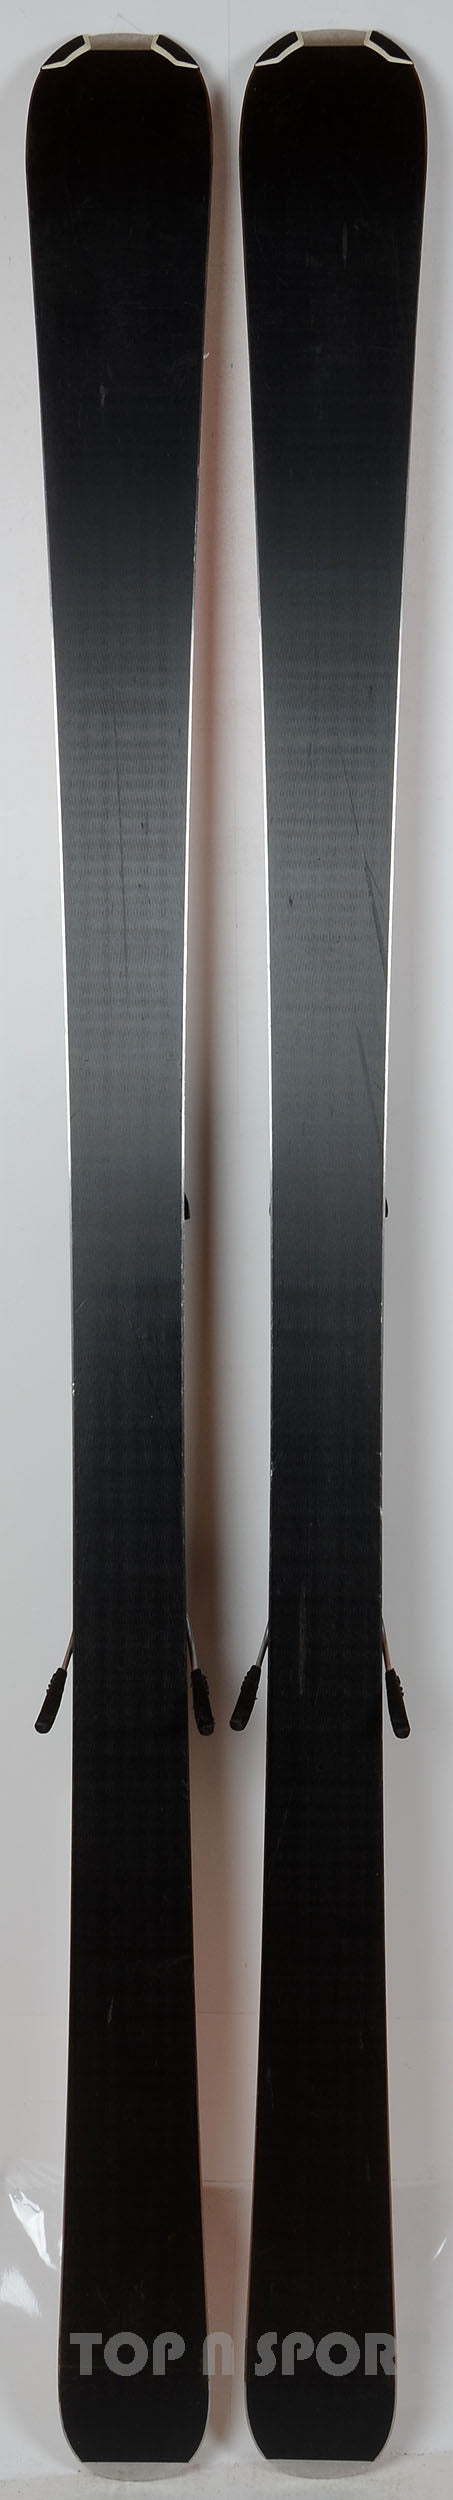 Head REV 80  - skis d'occasion